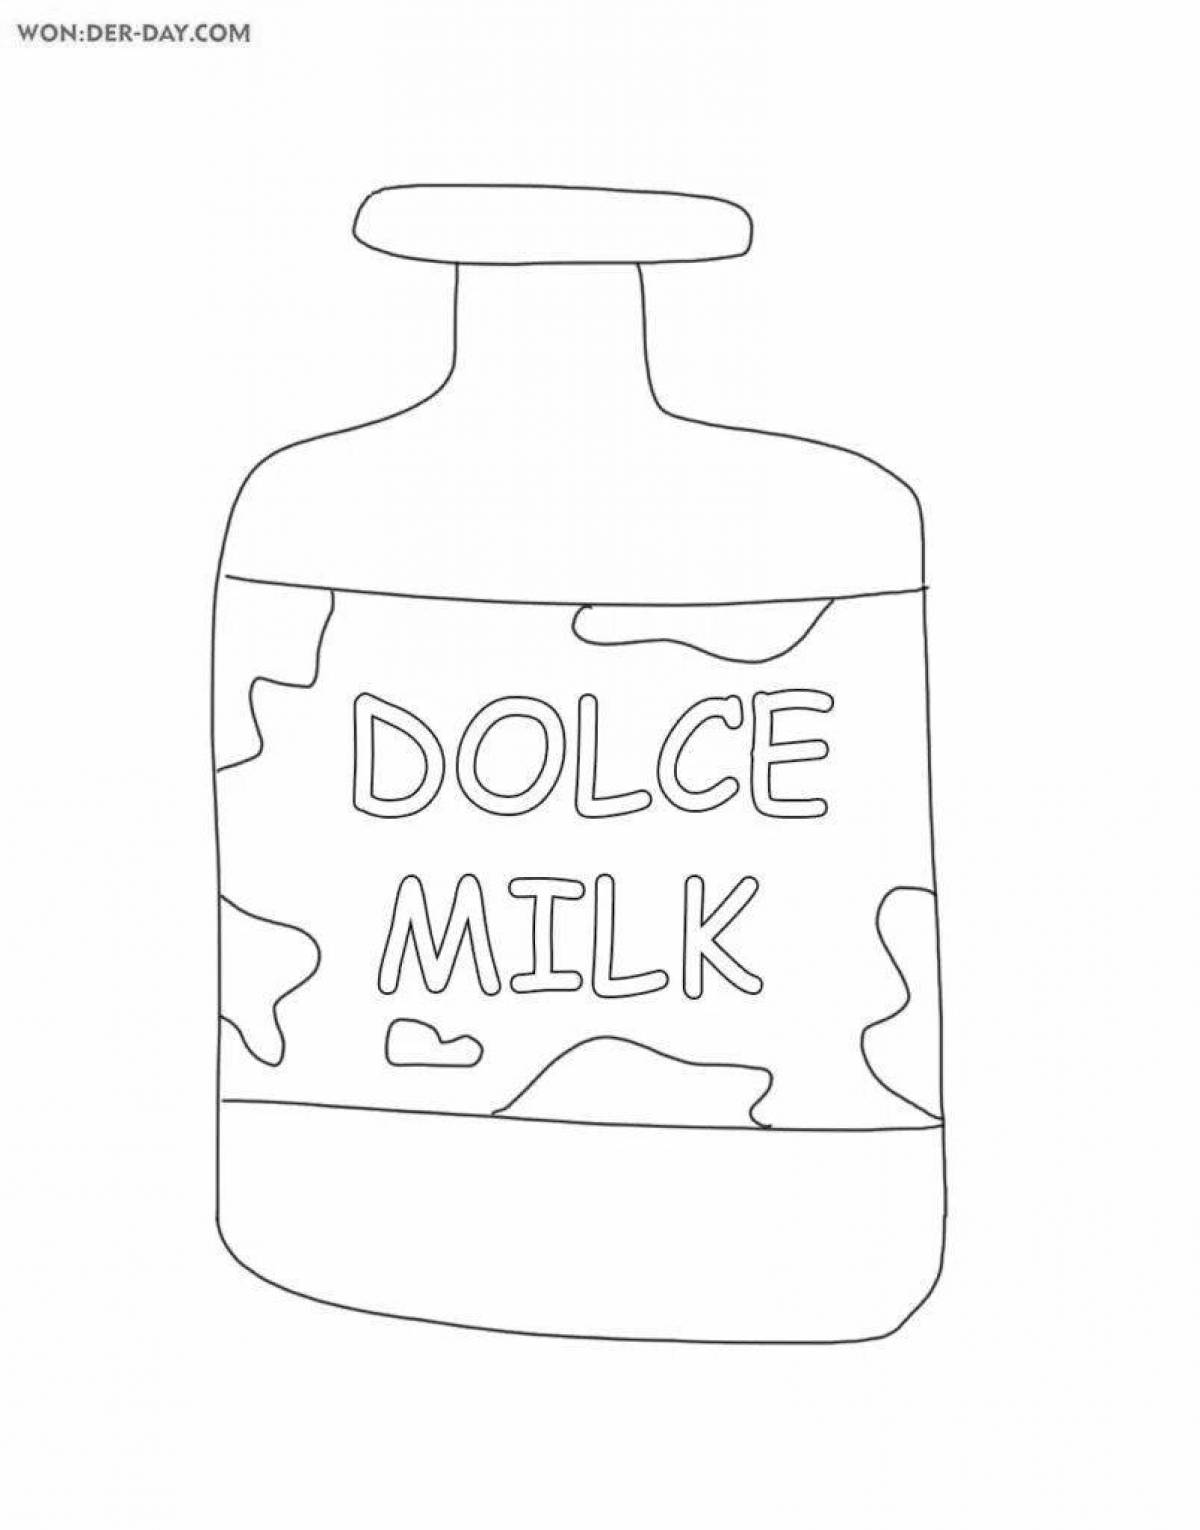 Radiantly coloring page dolce milk shampoo